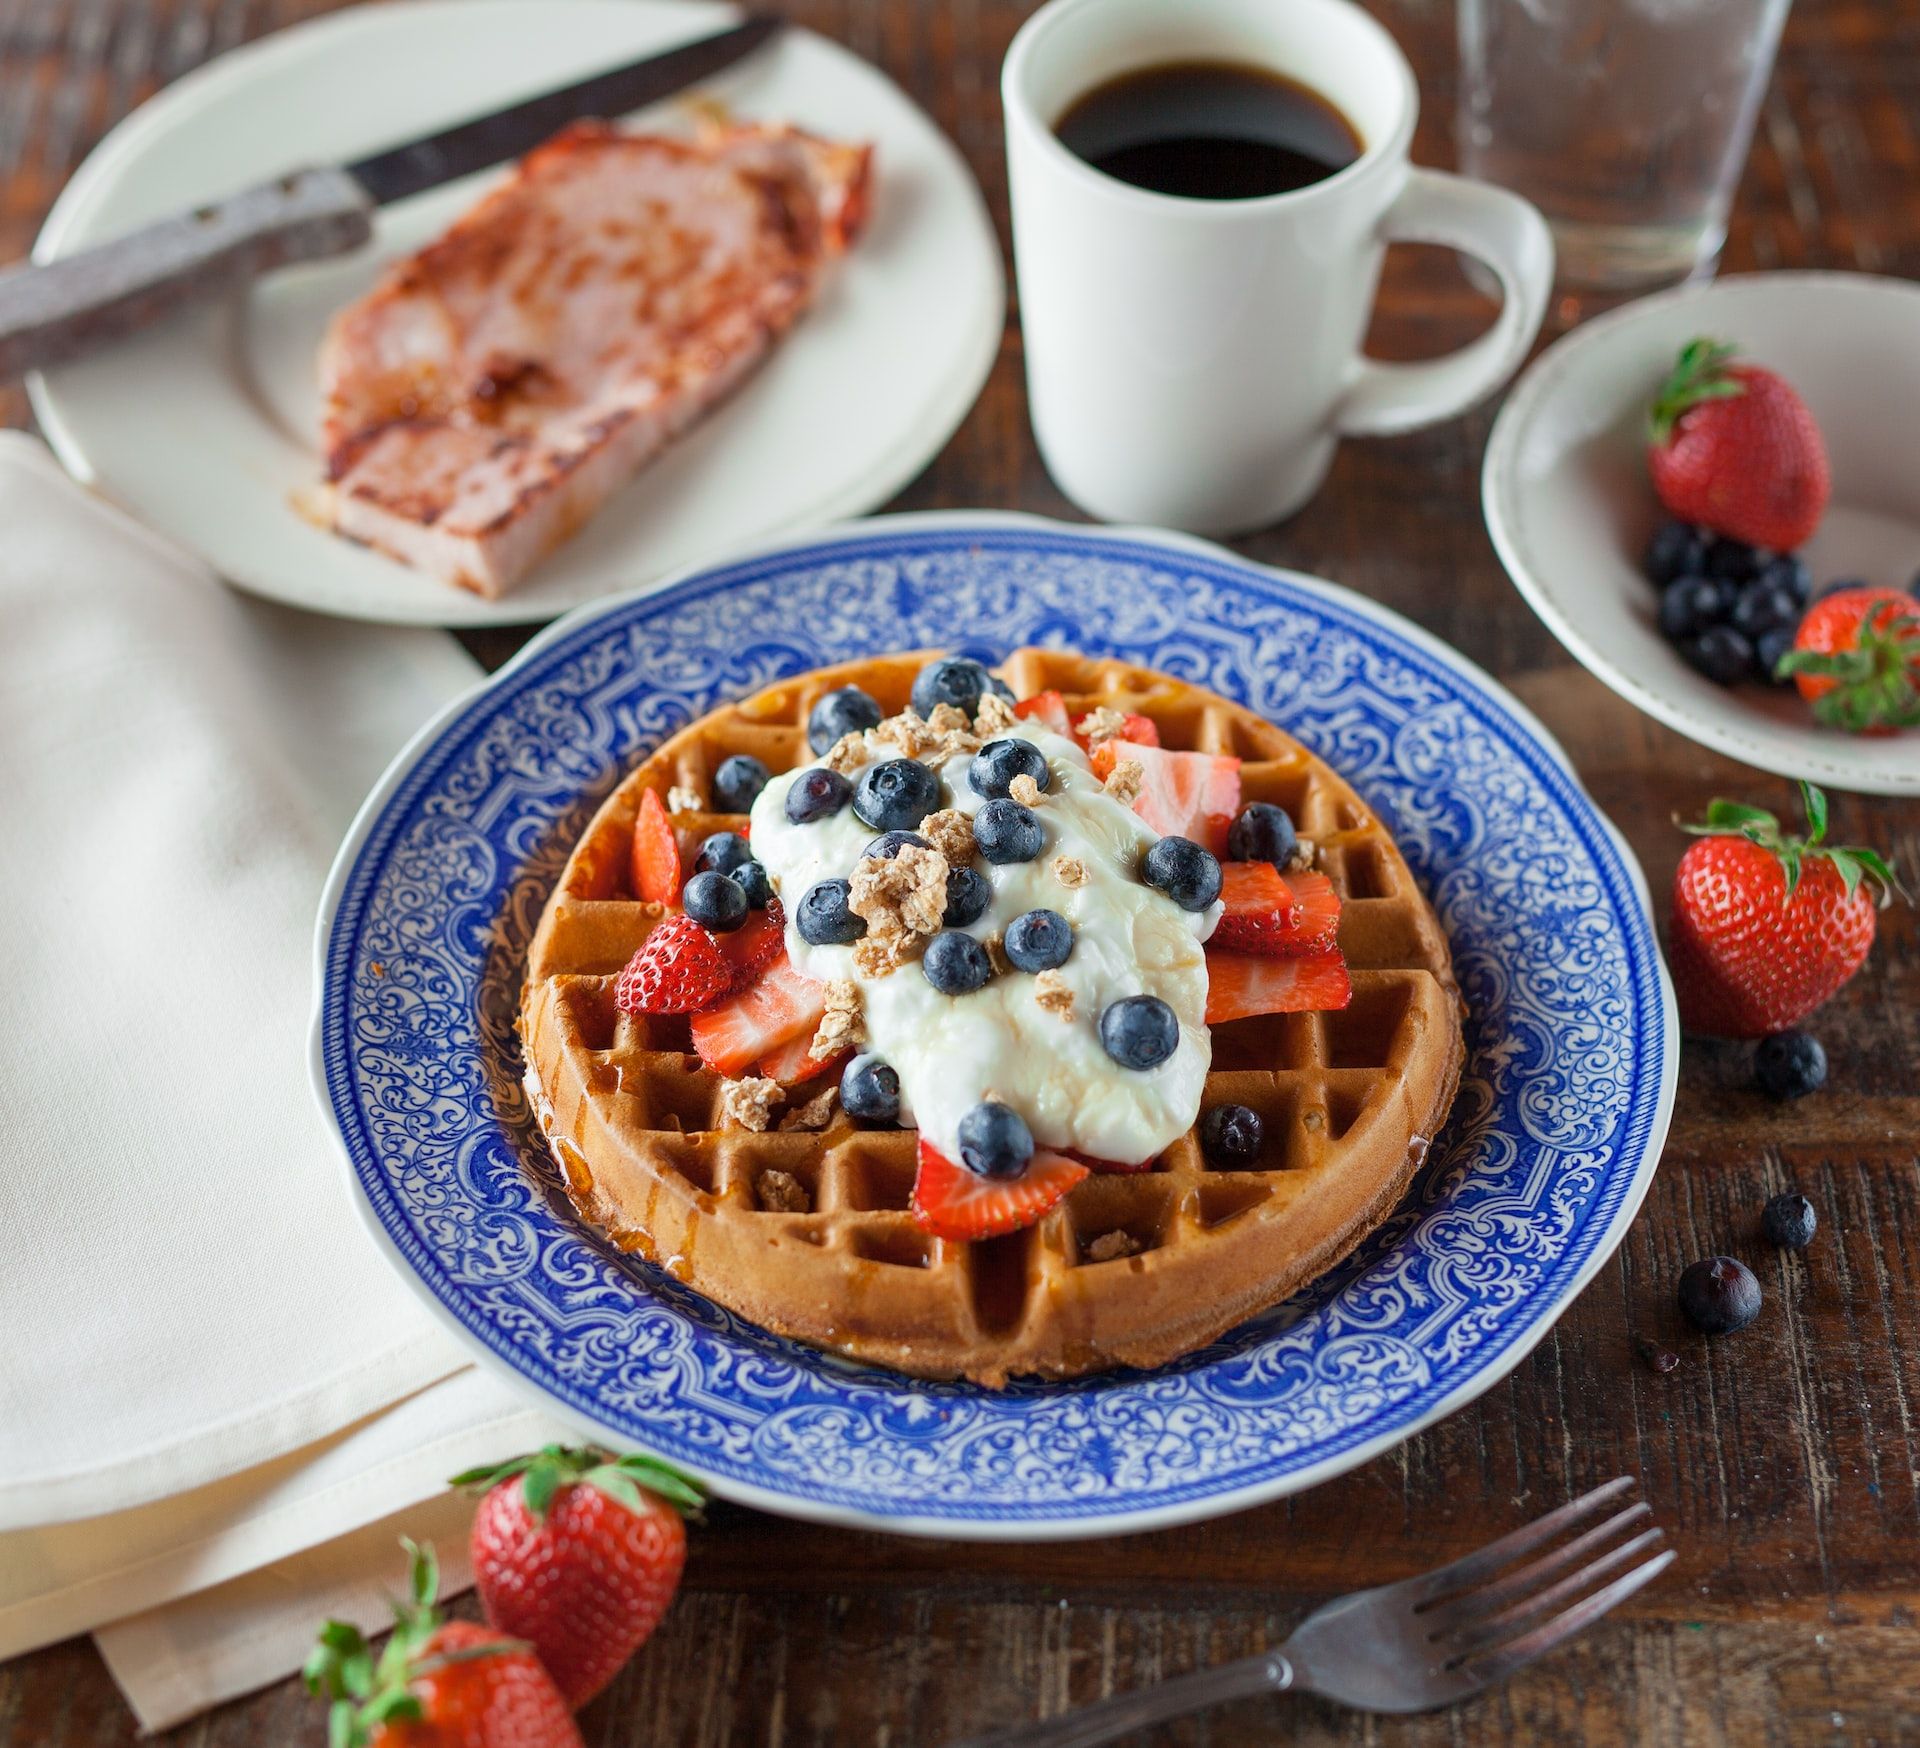 Waffles with blueberries, strawberries, and whipped cream.